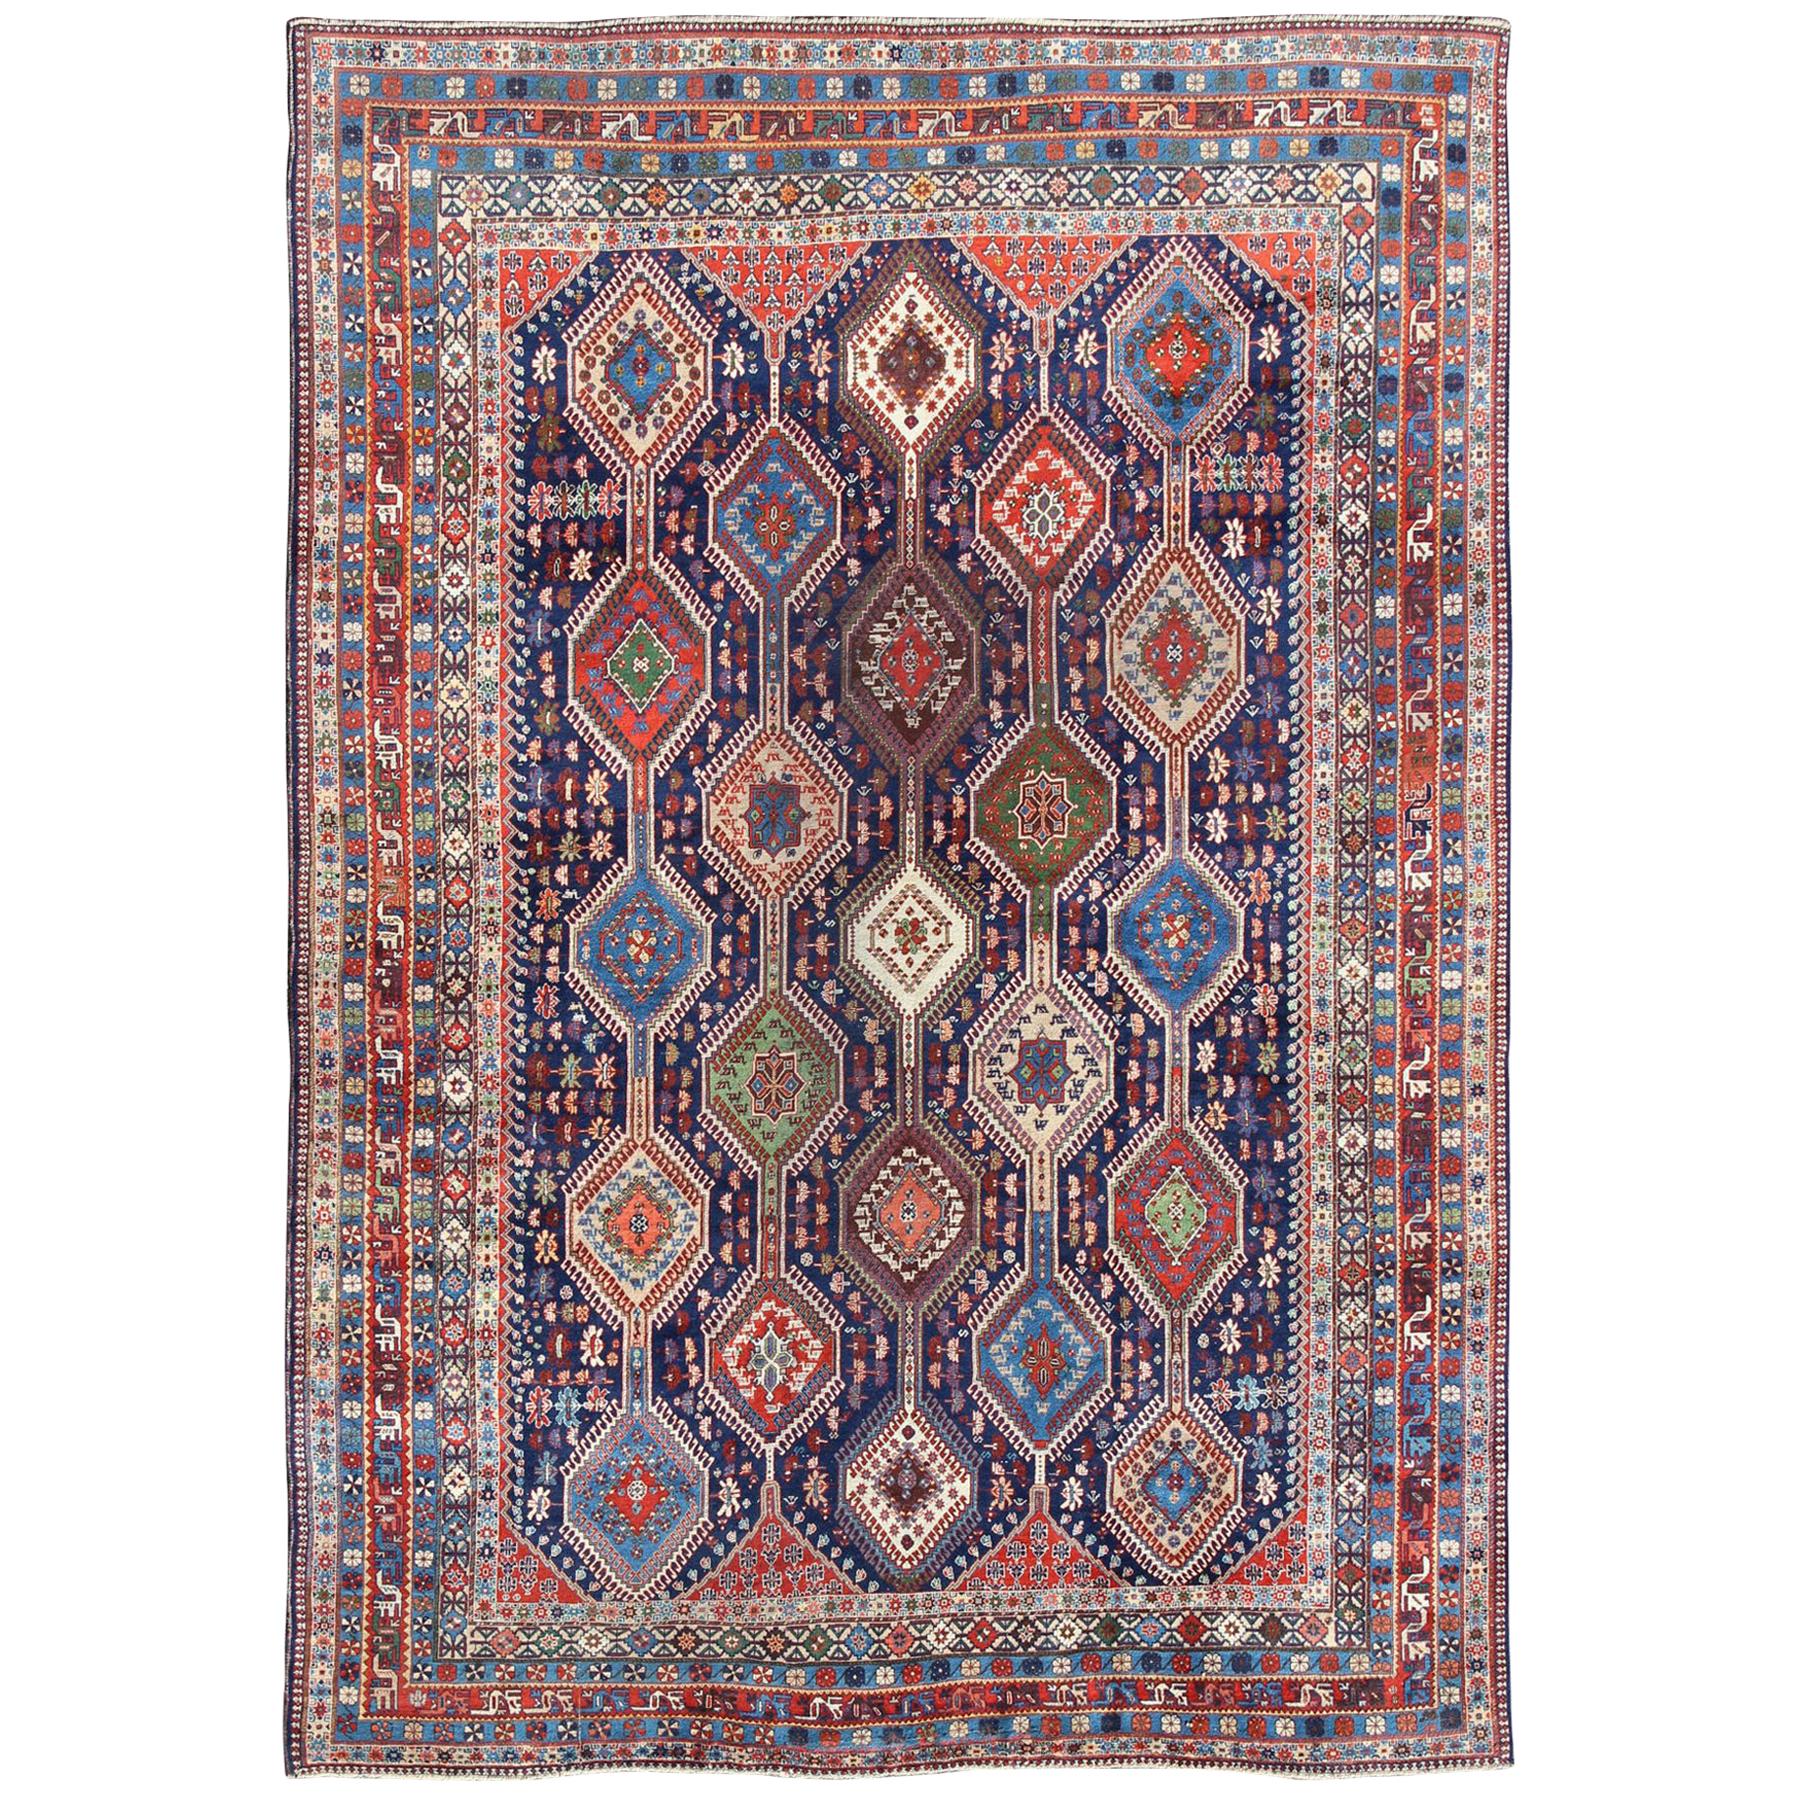 Antique Persian Large Afshar Rug with Rich Jewel Tones and Diamond Design For Sale